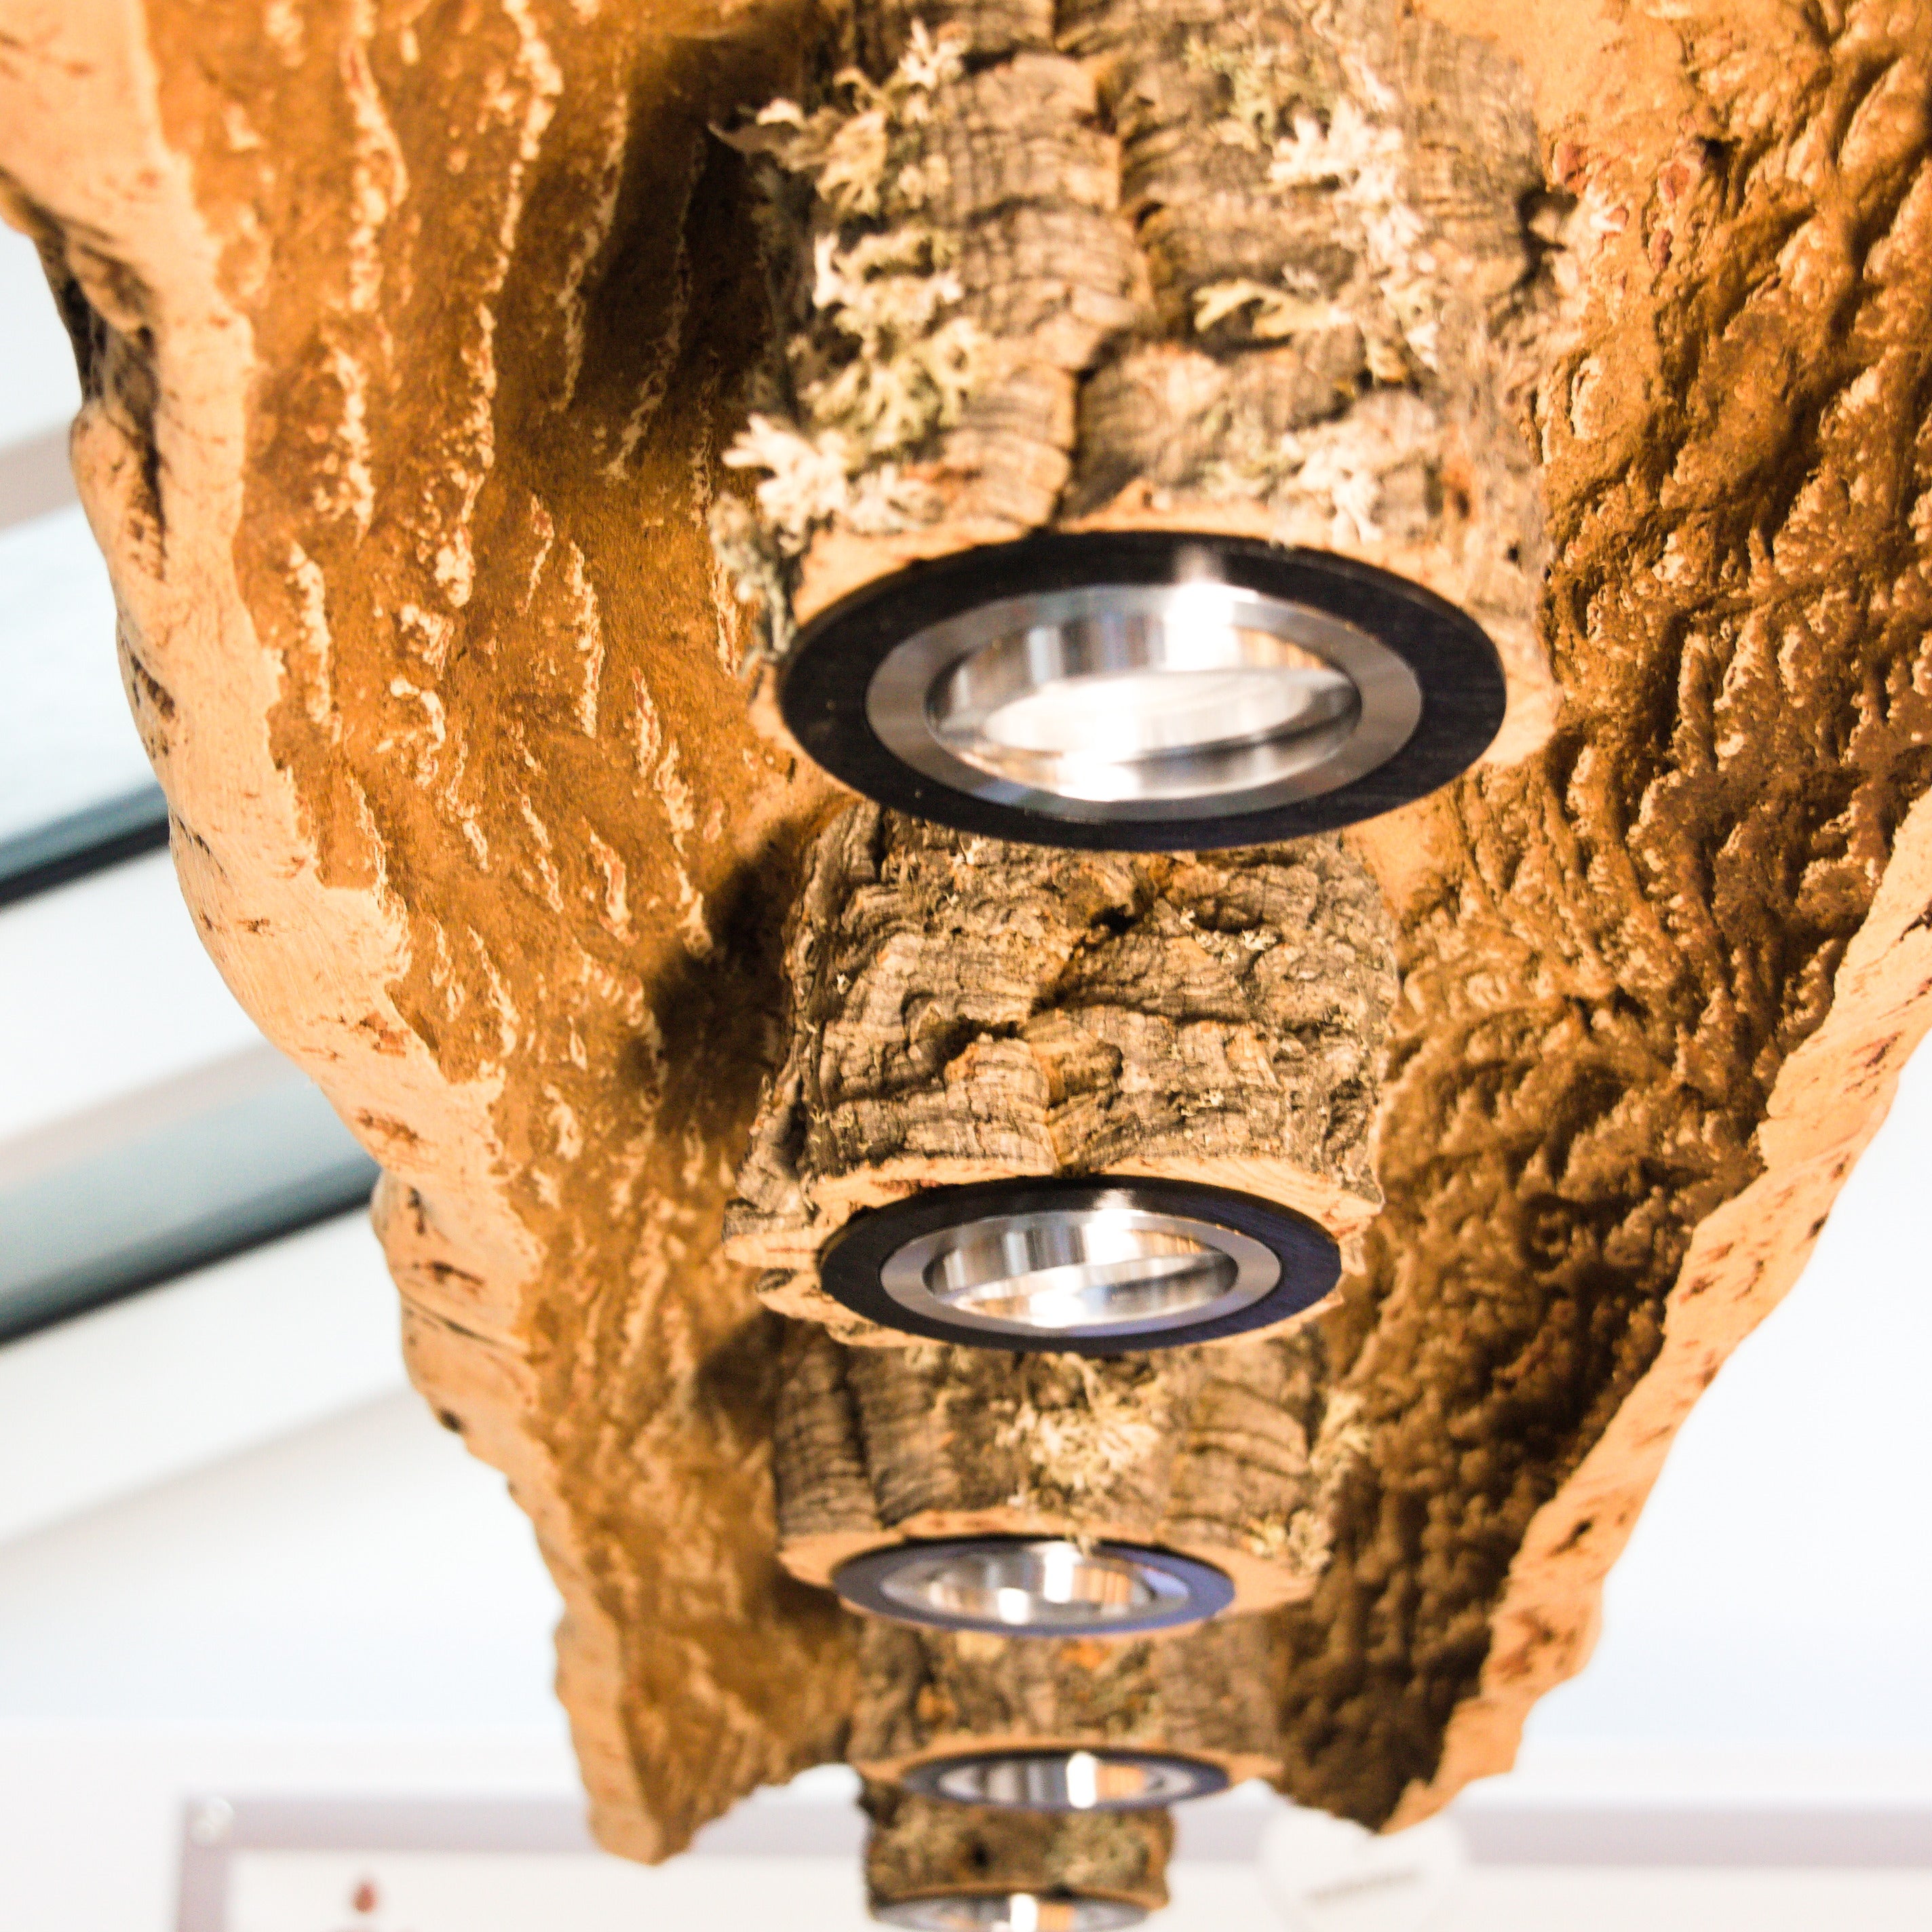 VERKORKst premium hanging lamp made of cork bark * rustic ceiling light * exclusive vintage hanging lamp in country style * dining room dining table